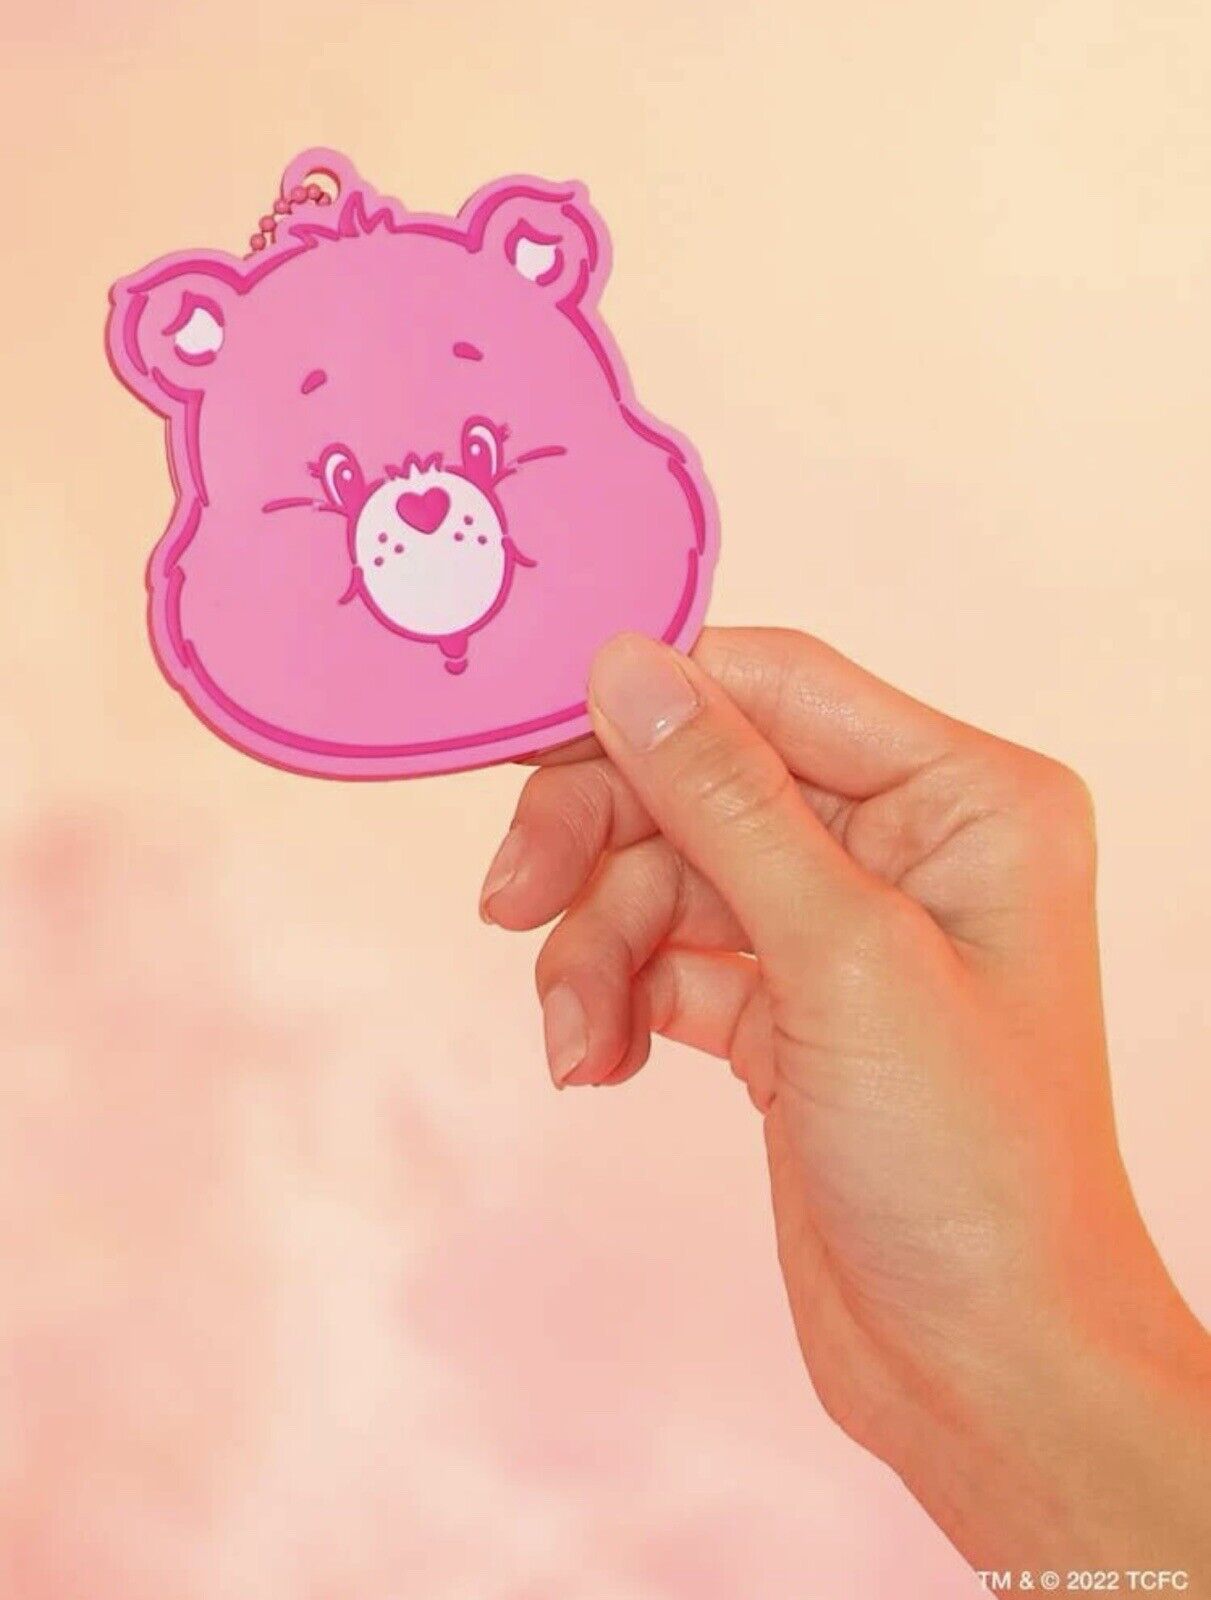 A person holding up an object that looks like teddy bear - Care Bears